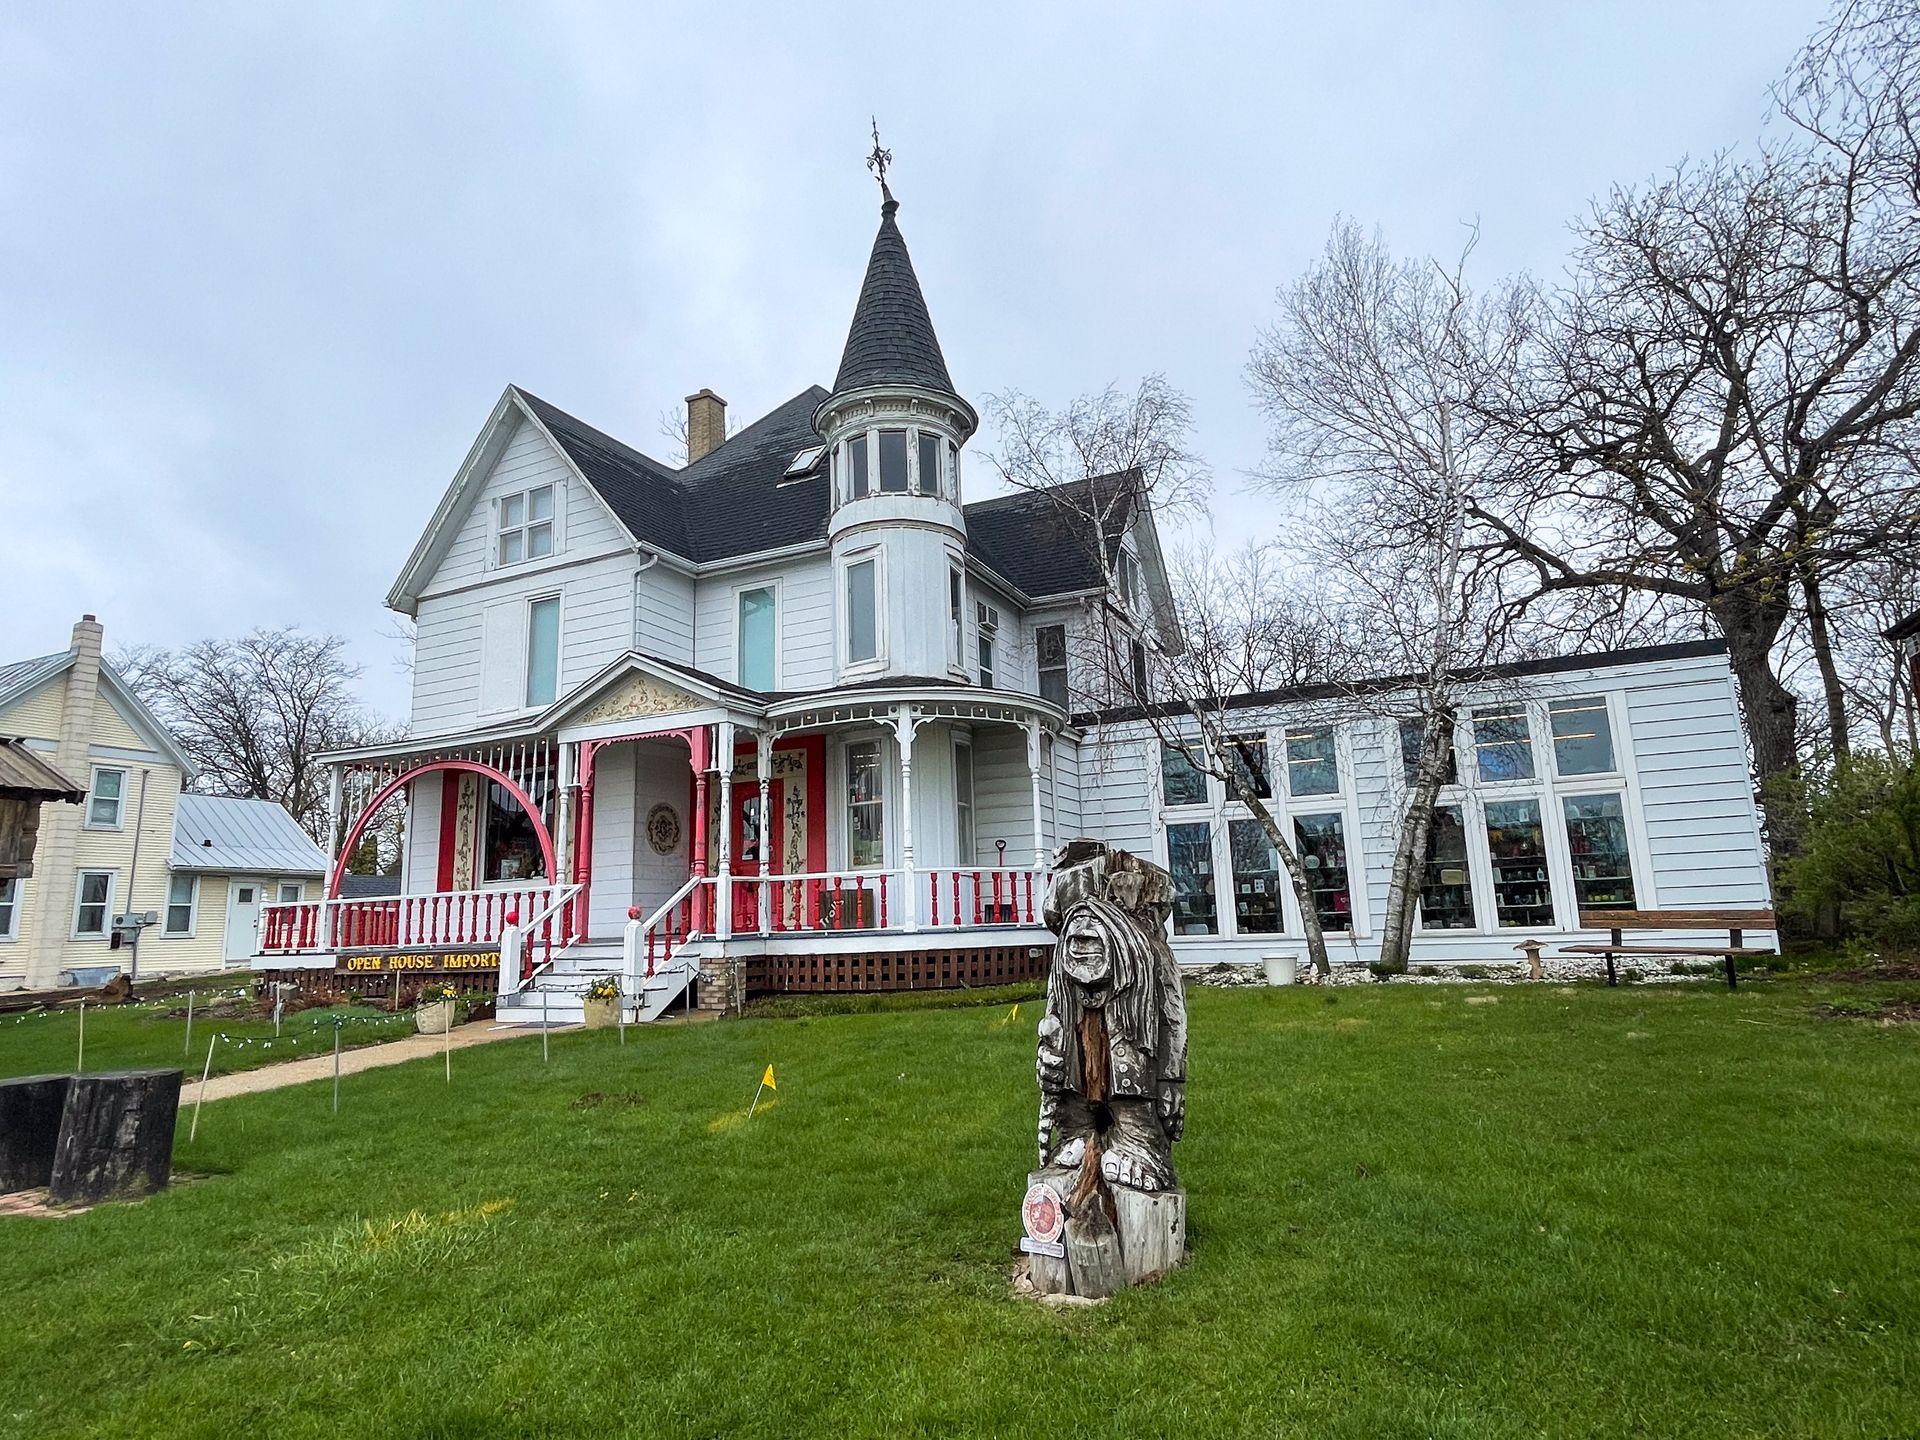 The exterior of Open Source Imports. It's a white building that looks like a historic home. A troll statue is in the lawn in front of the shop.